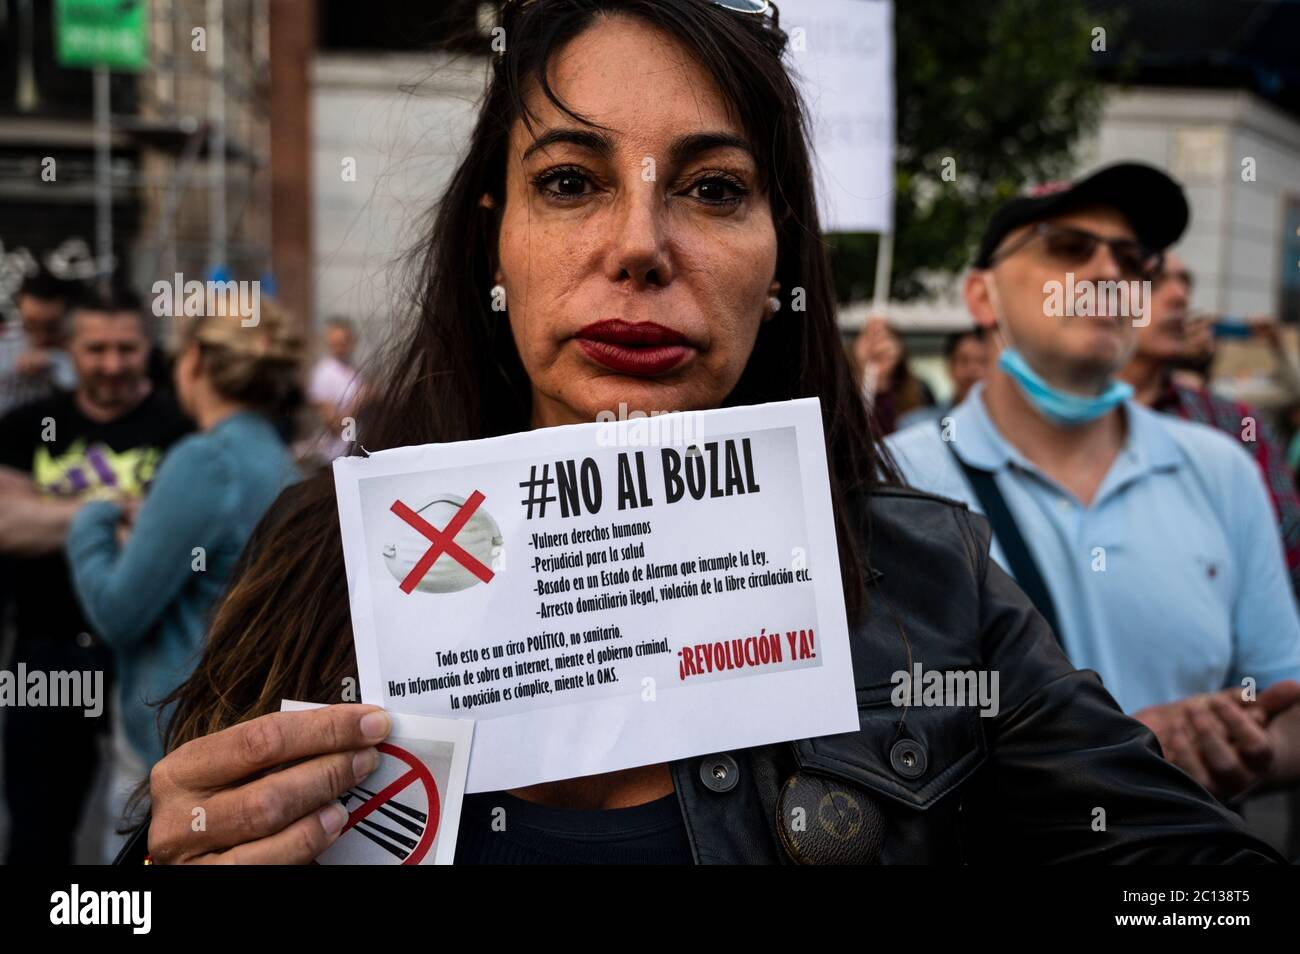 Madrid, Spain. 13th June, 2020. Madrid, Spain. June 13, 2020. A woman protesting against new normality and New World Order conspiracy theory during the coronavirus (COVID-19) crisis. Credit: Marcos del Mazo/Alamy Live News Stock Photo